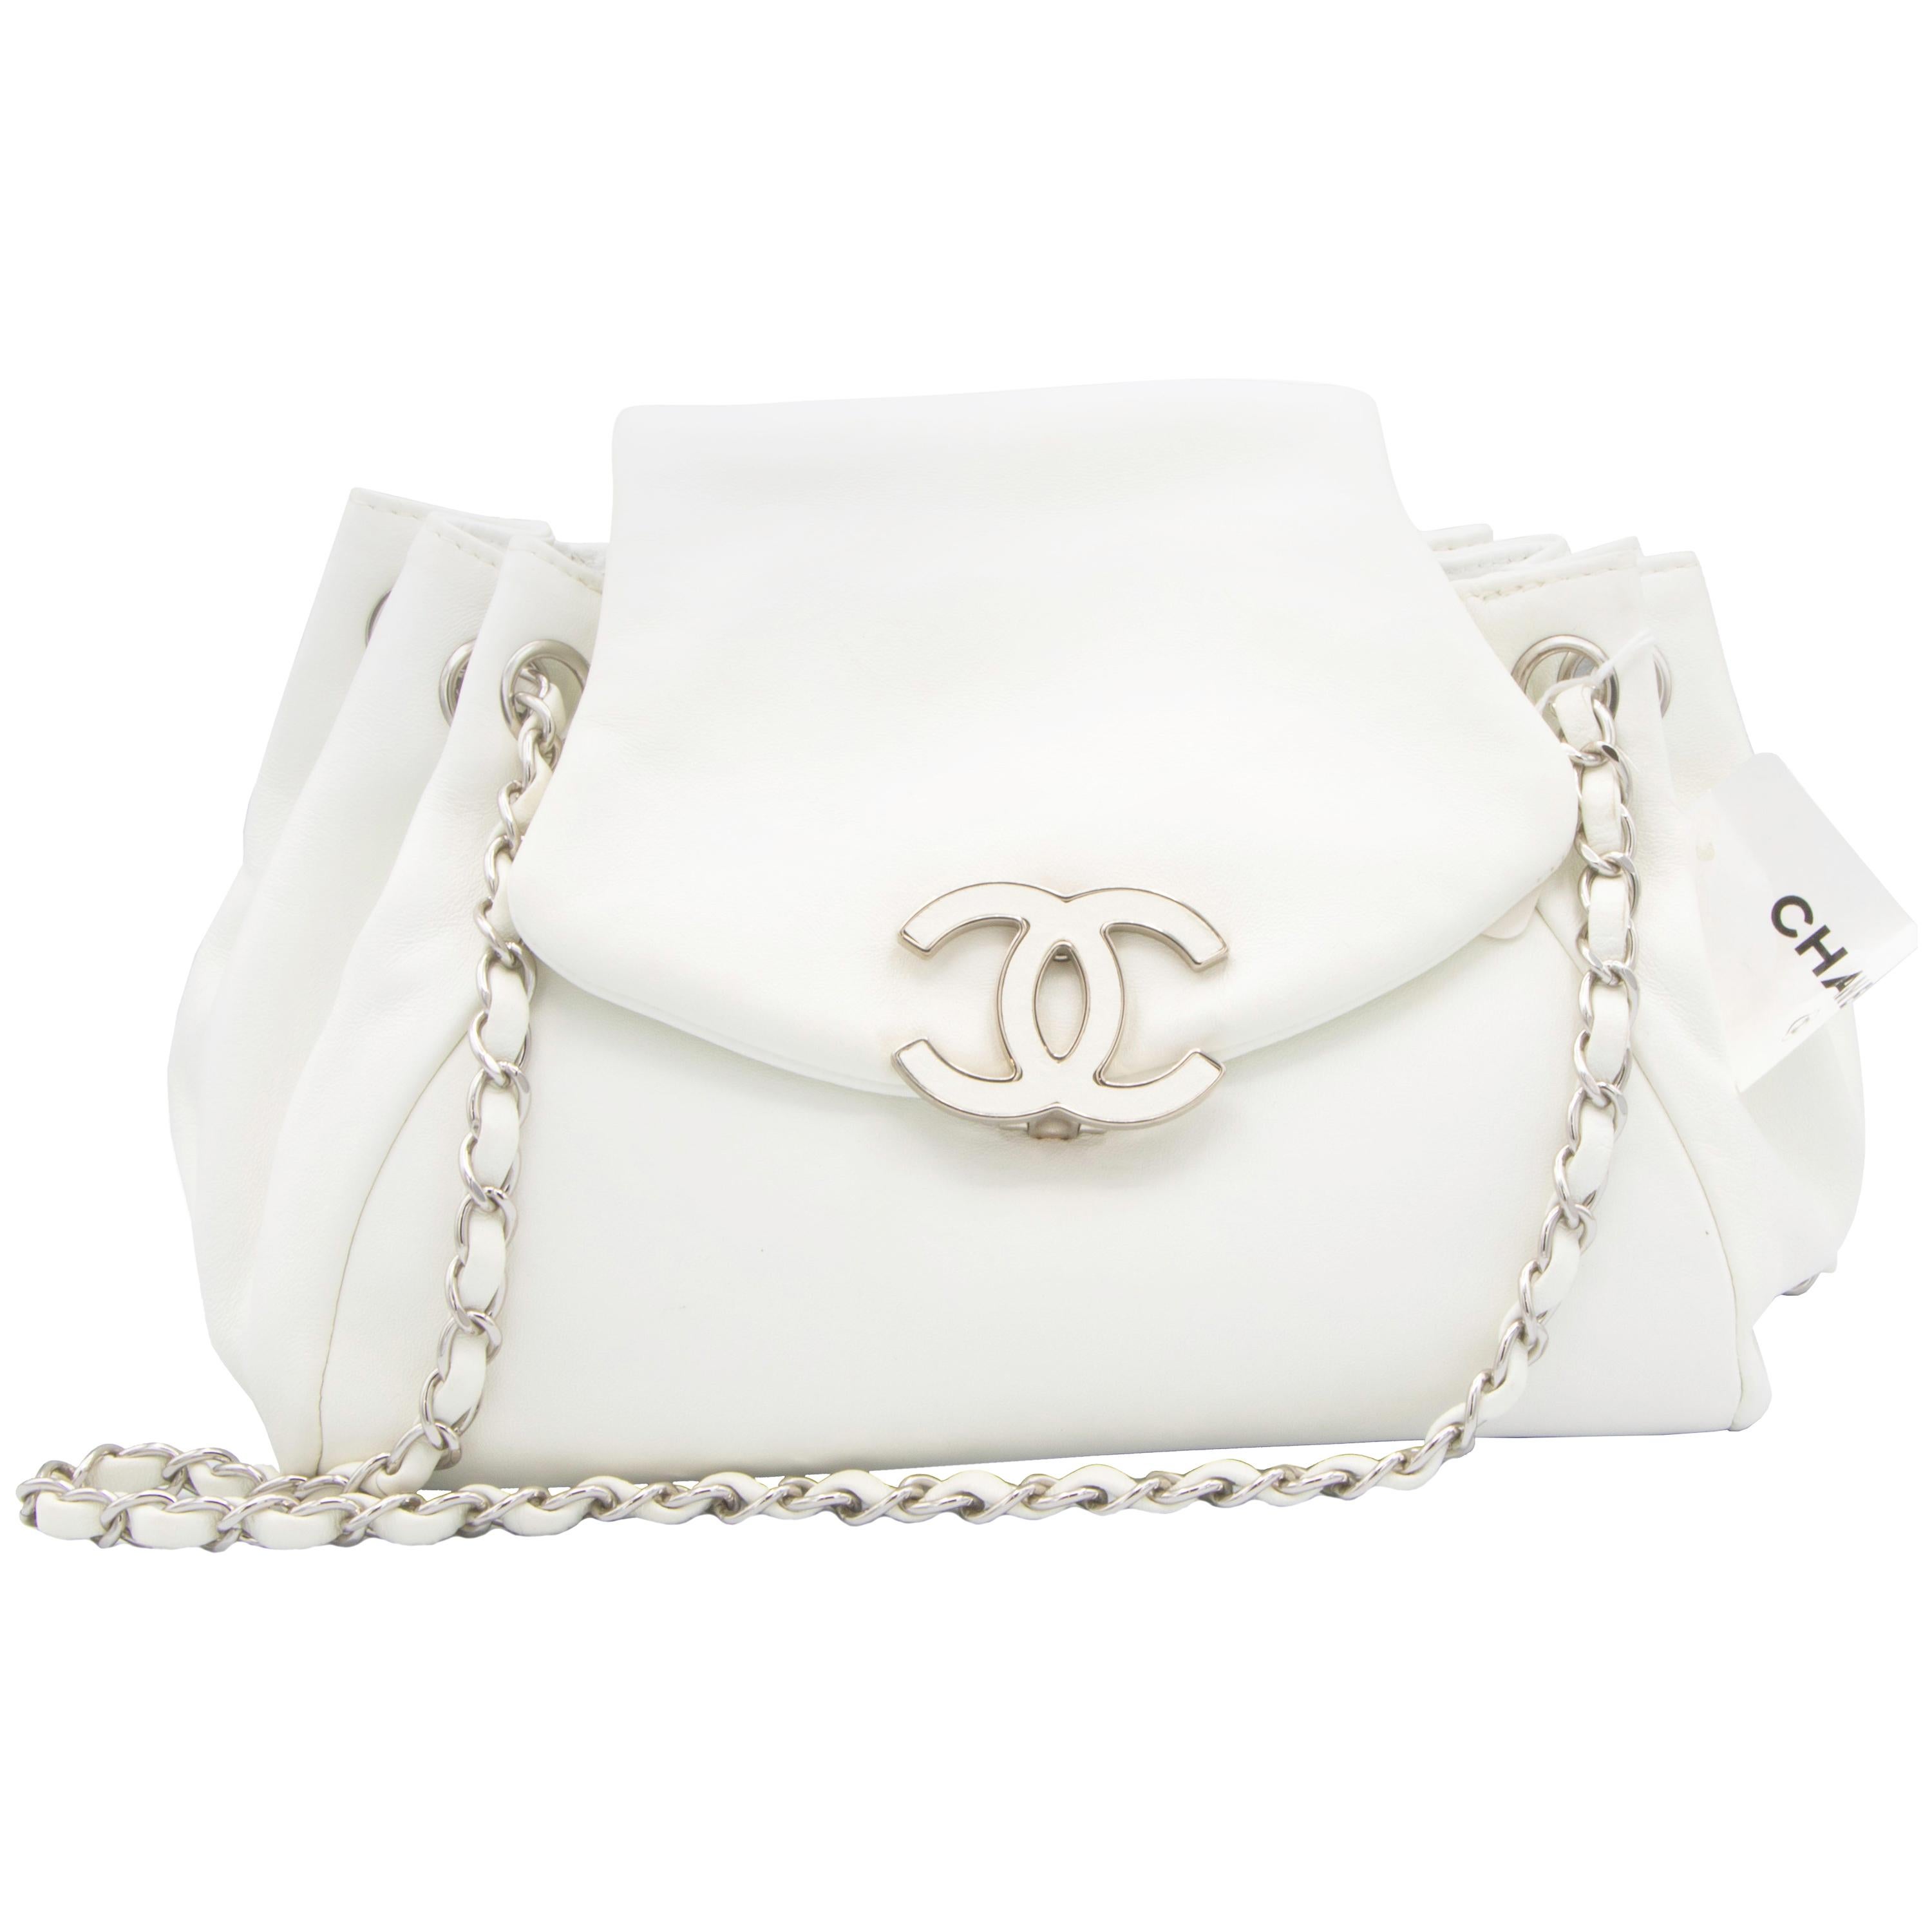 Vintage White Chanel Handbag with Matching Leather and Silver-Colored Strap